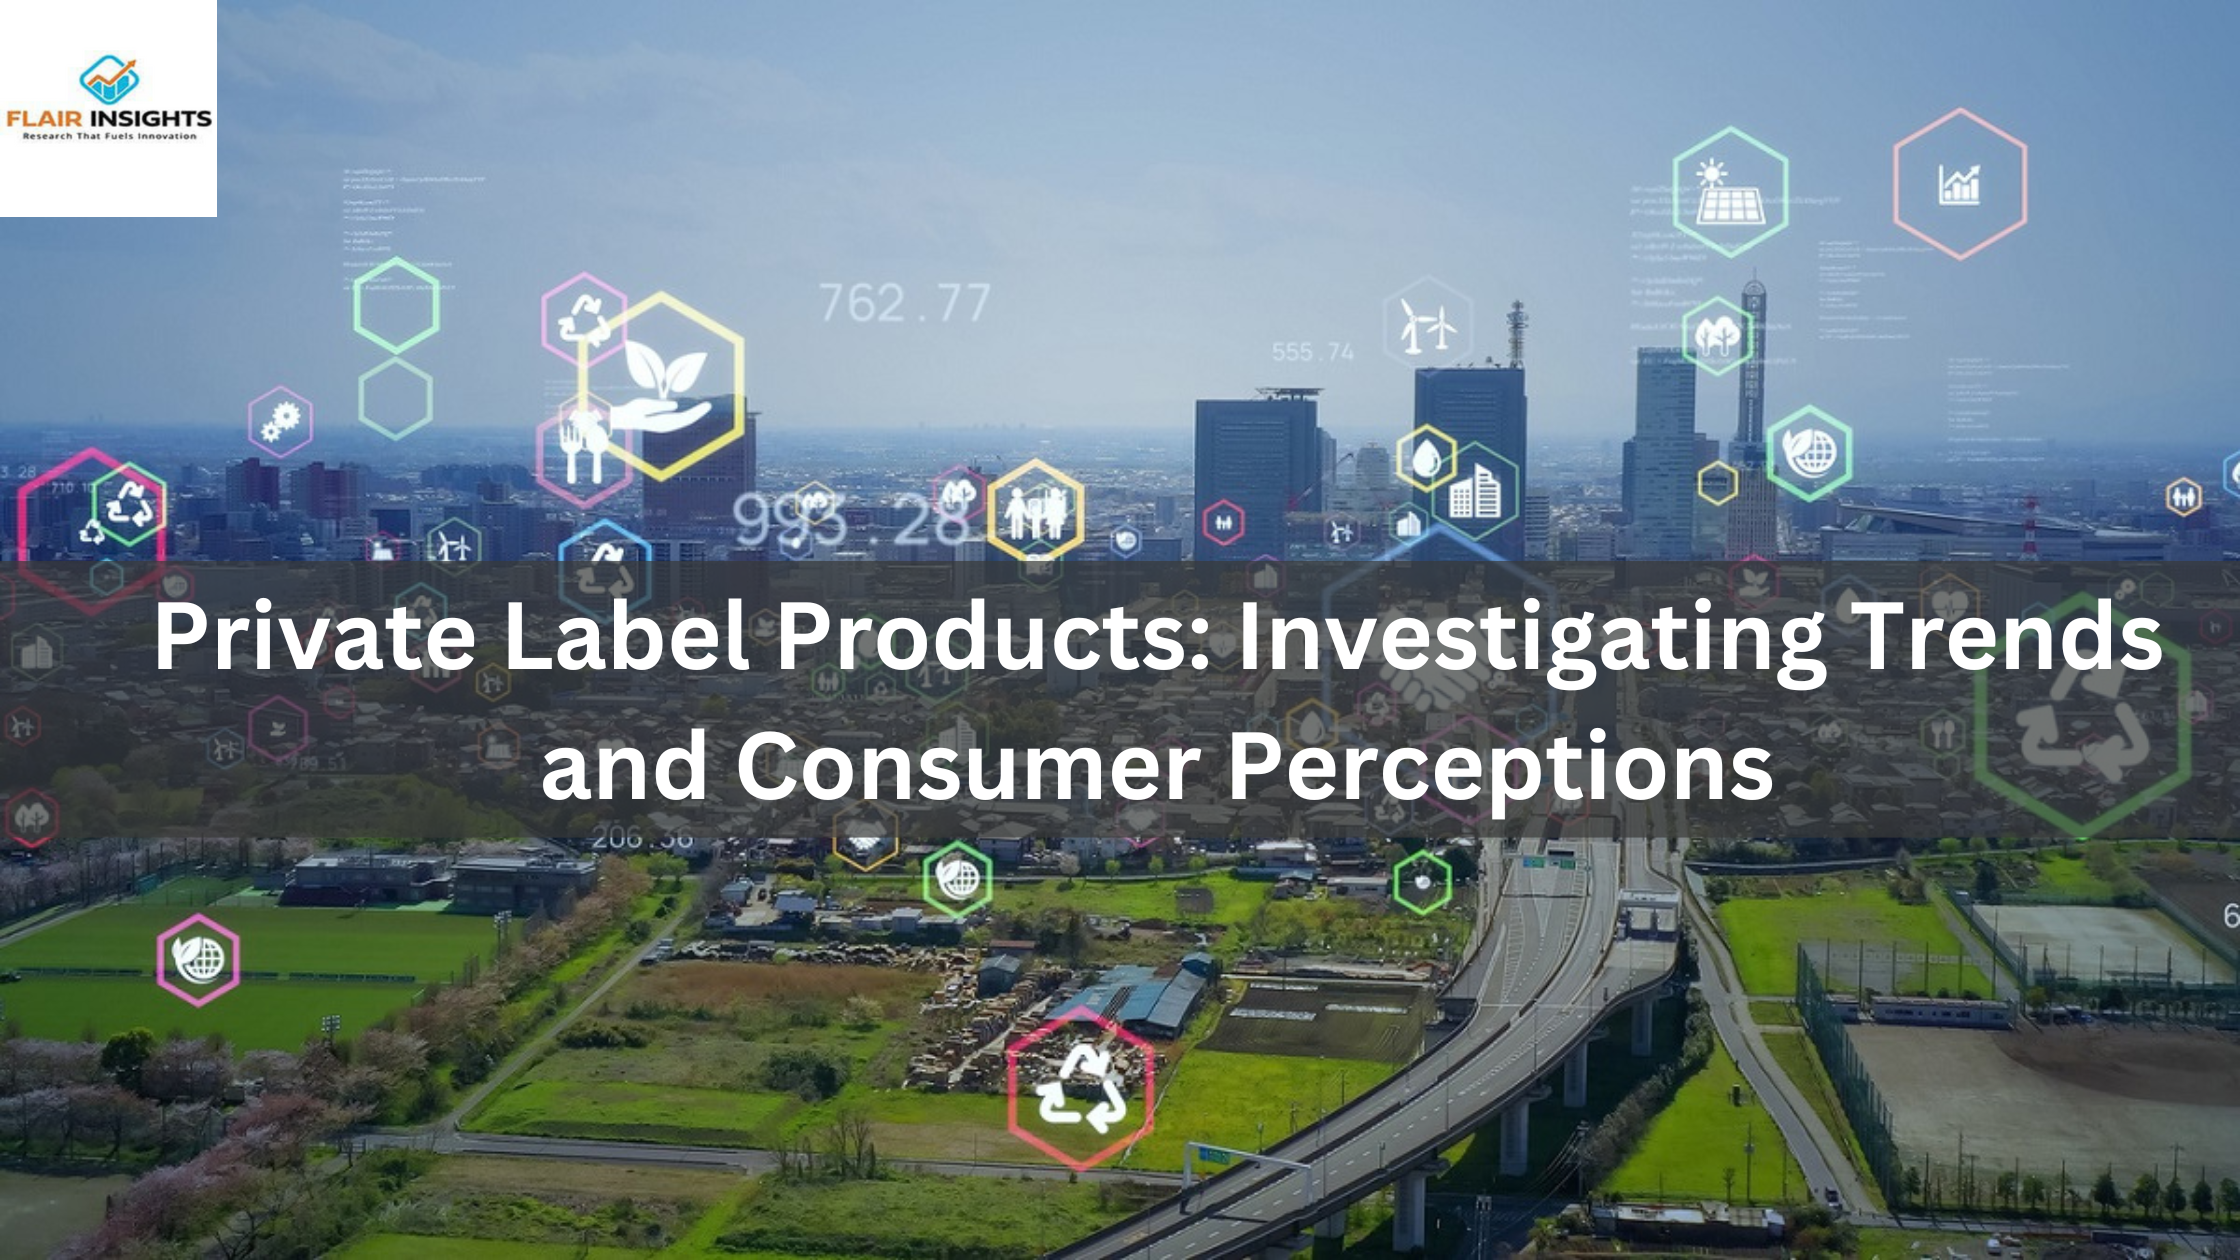 Private Label Products: Investigating Trends and Consumer Perceptions